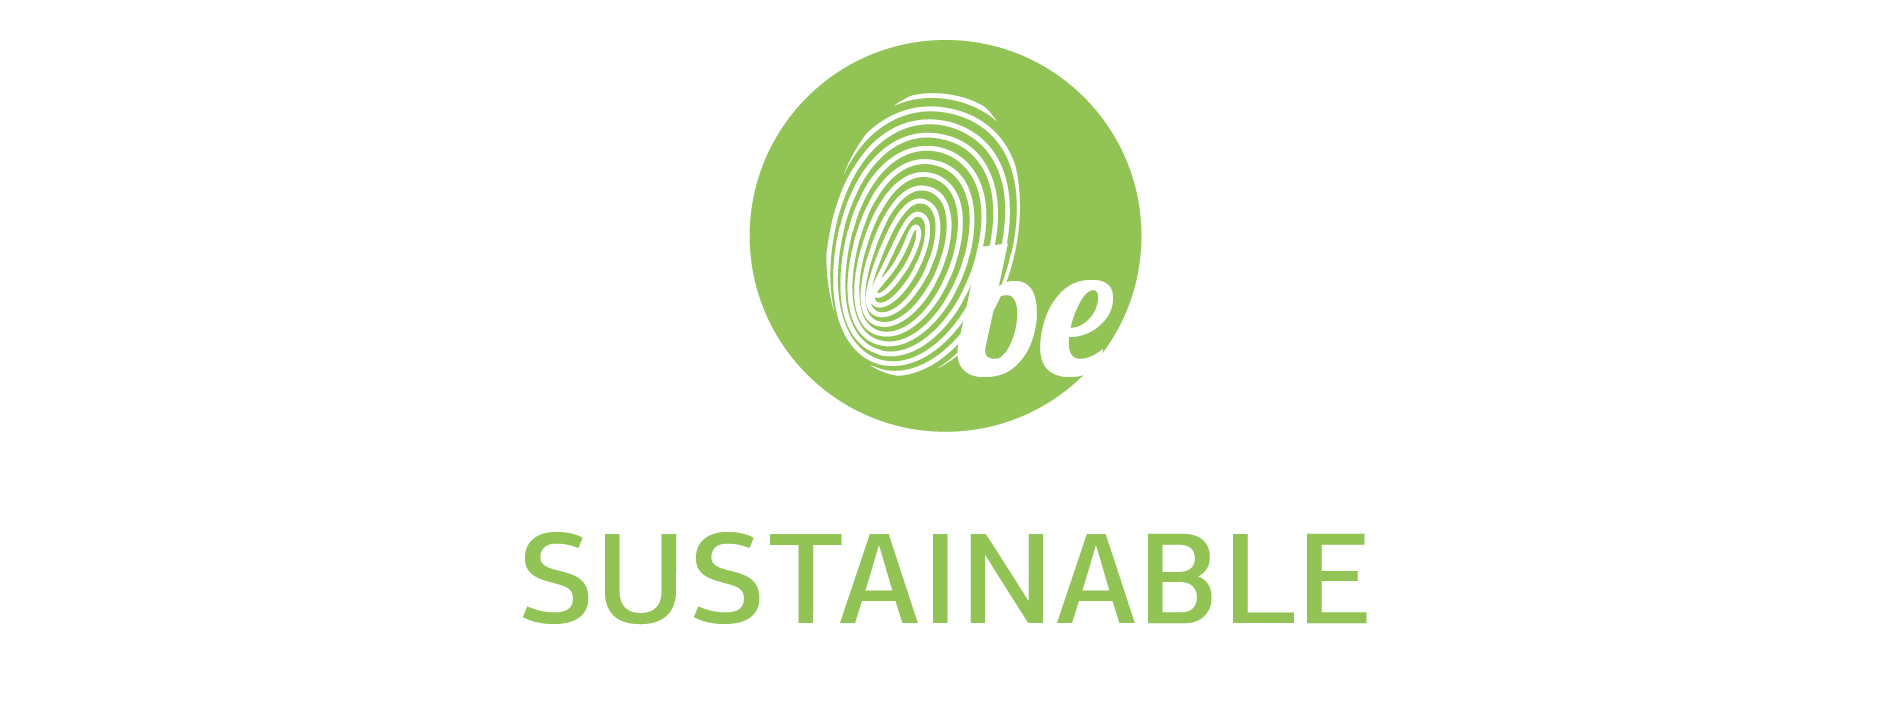 be sustainable